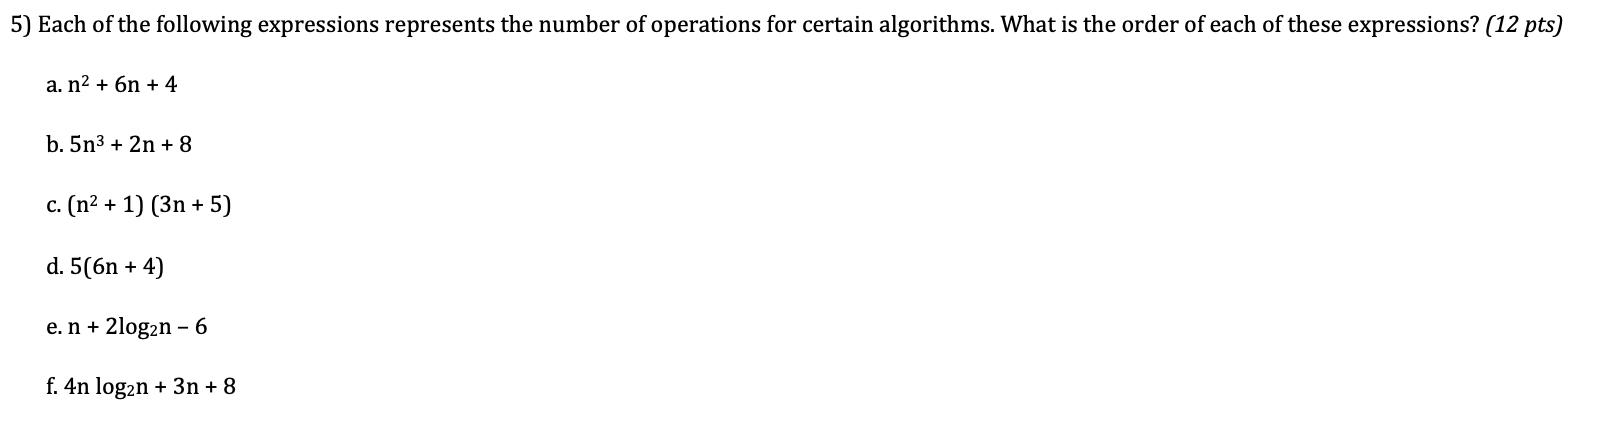 5) Each of the following expressions represents the number of operations for certain algorithms. What is the